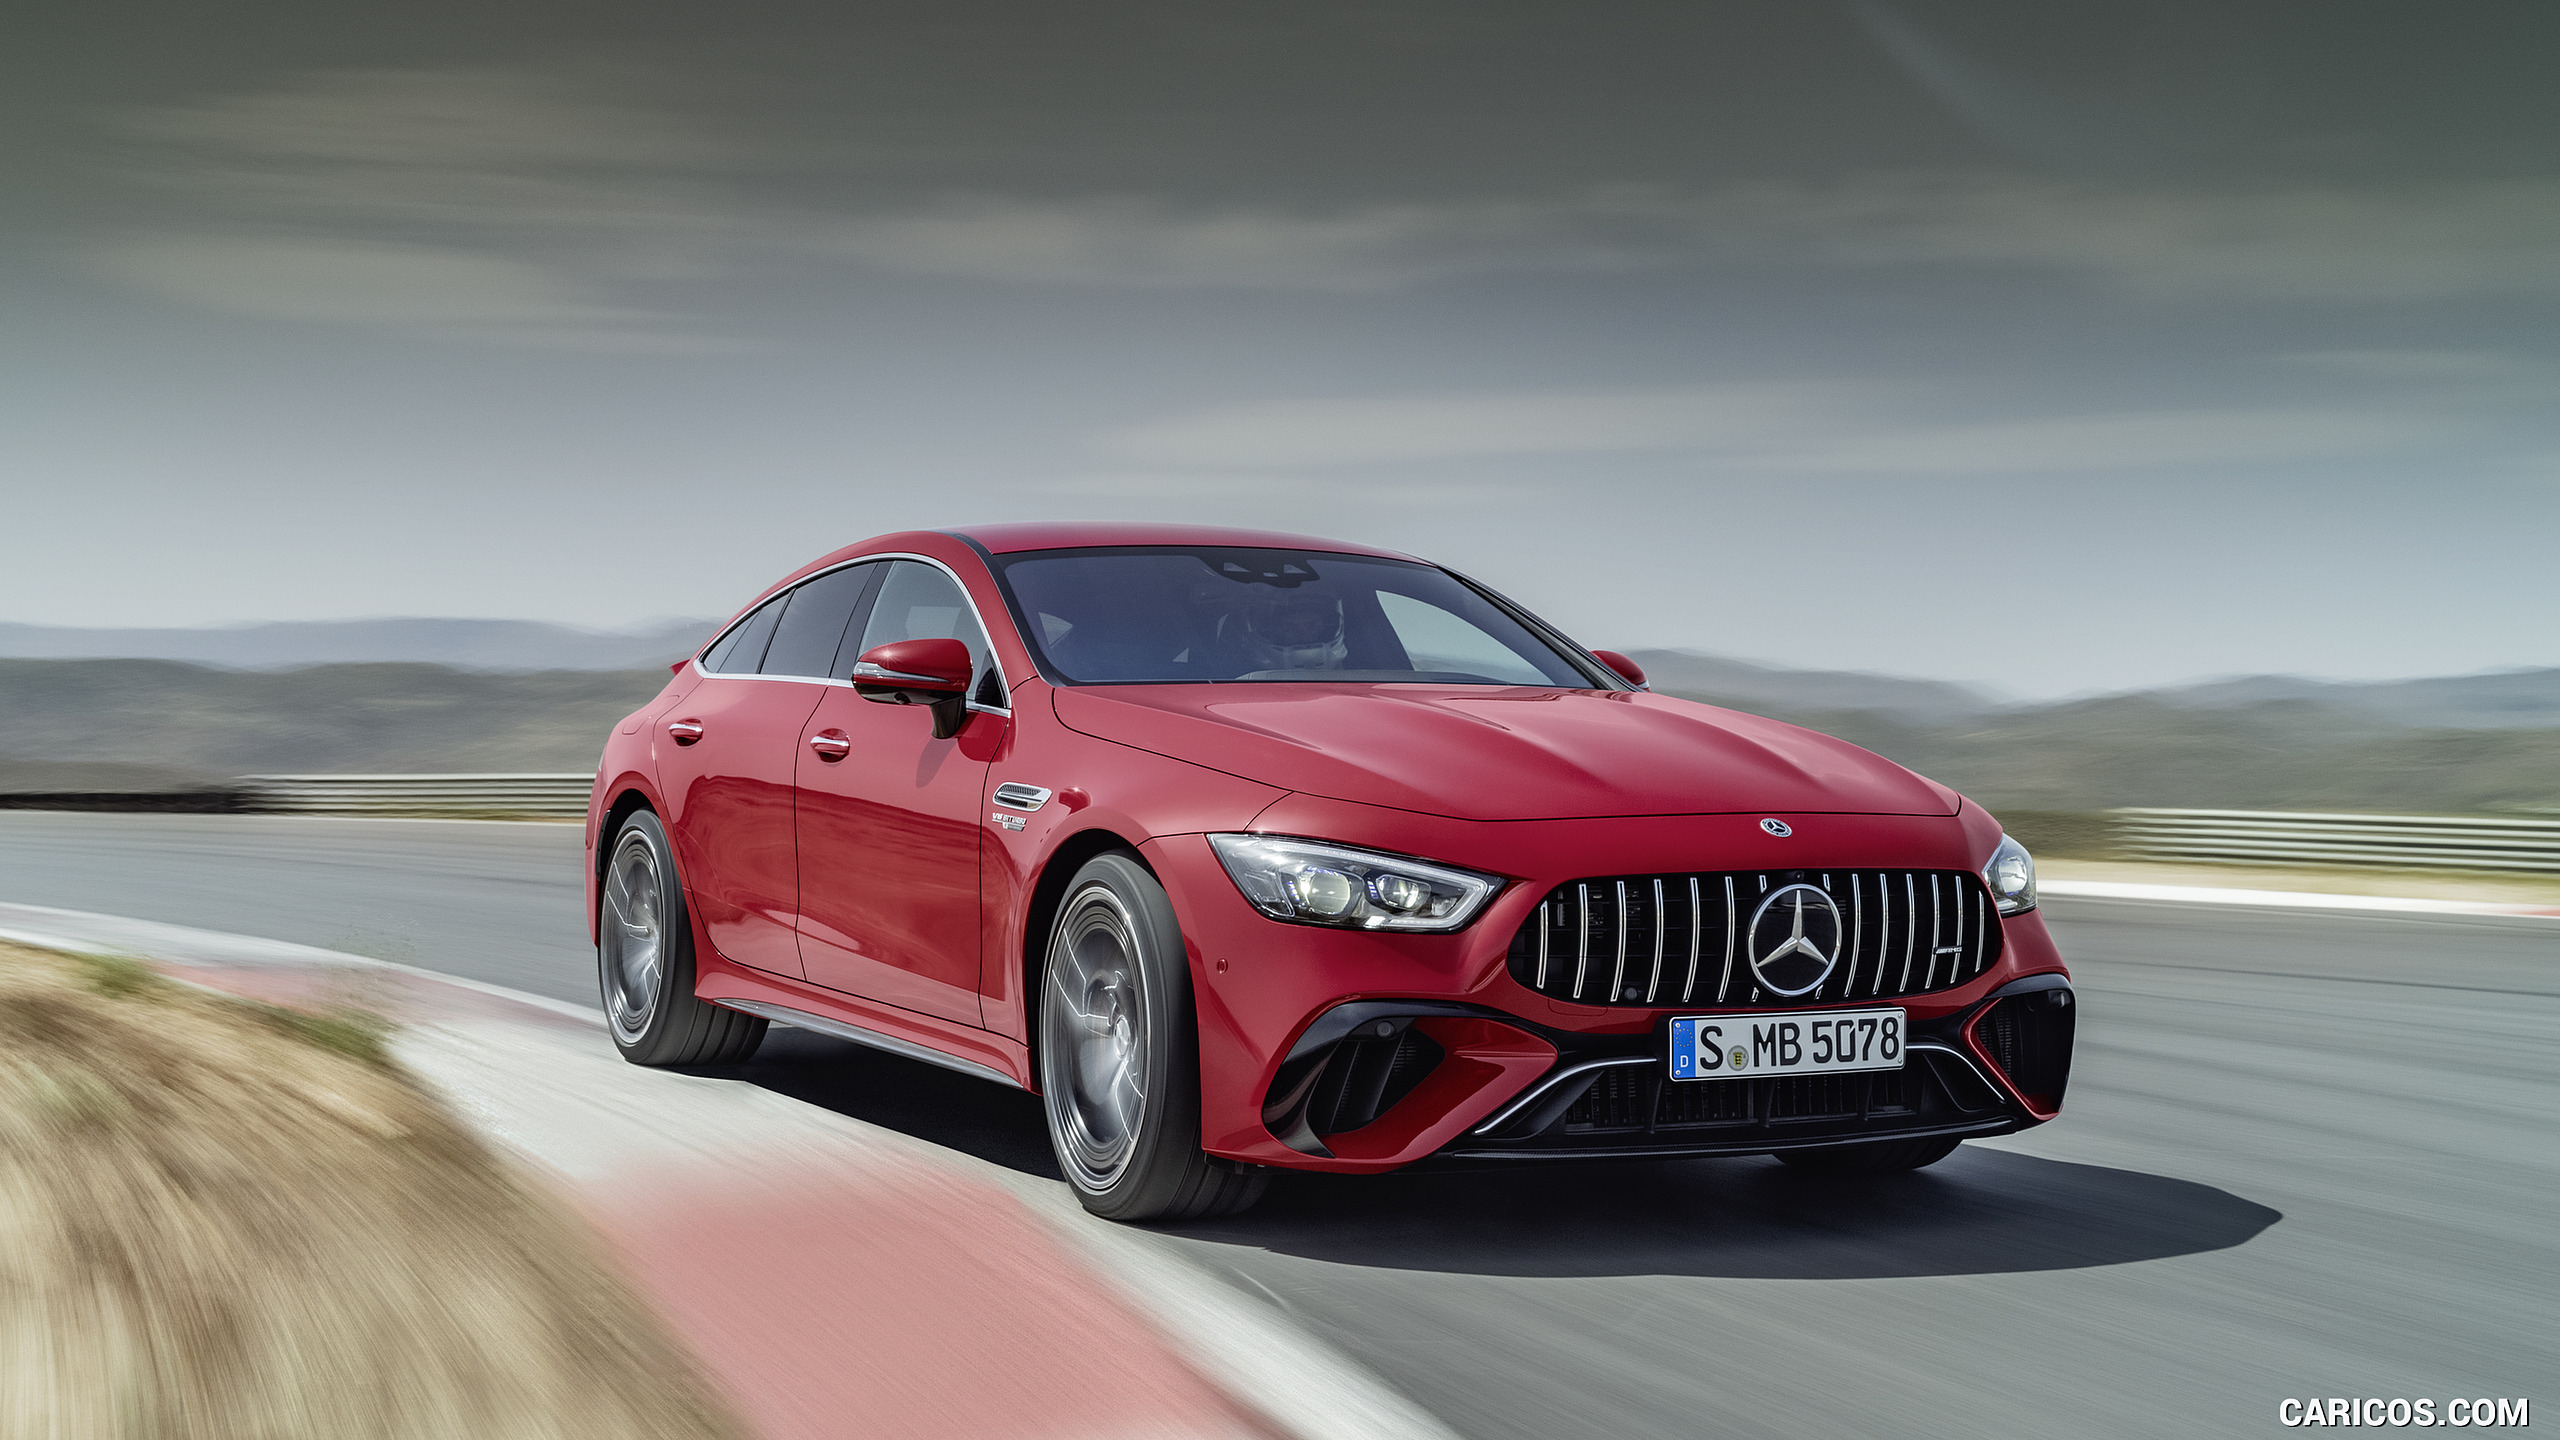 2022 Mercedes-AMG GT 63 S E Performance 4MATIC+ (Color: Jupiter Red) - Front Three-Quarter, #13 of 88